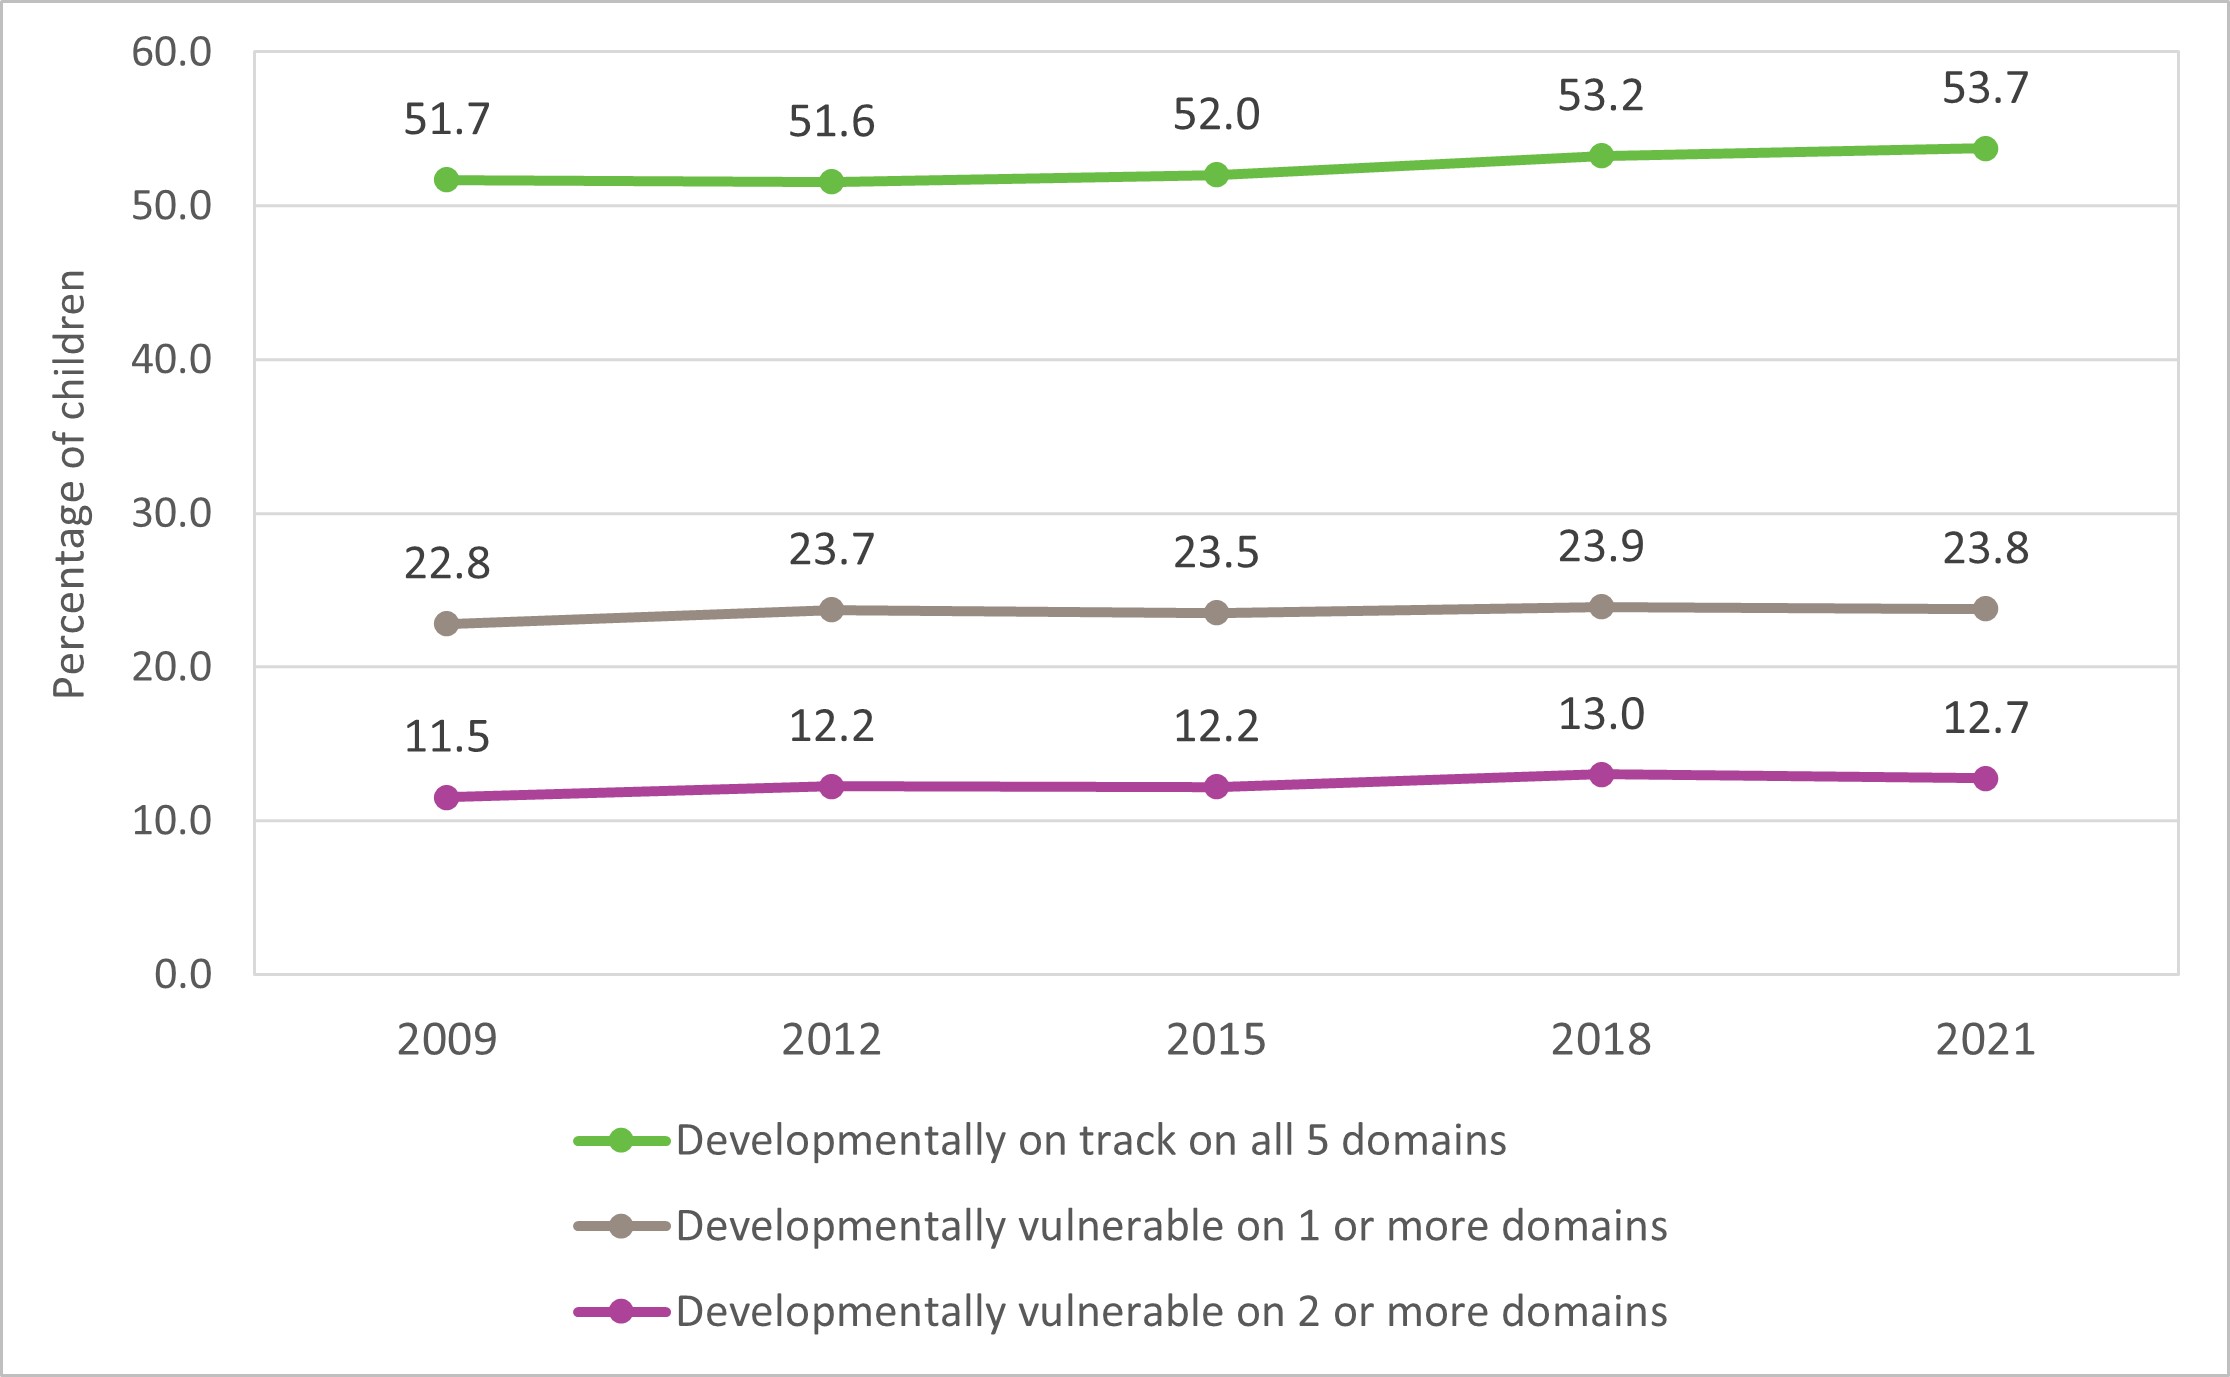 Graph showing 3 lines that represent AEDC summary indicator percentages from 2009 to 2021 for children developmentally on track, children developmentally vulnerable on 1 or more domains and children developmentally vulnerable on 2 or more domains.